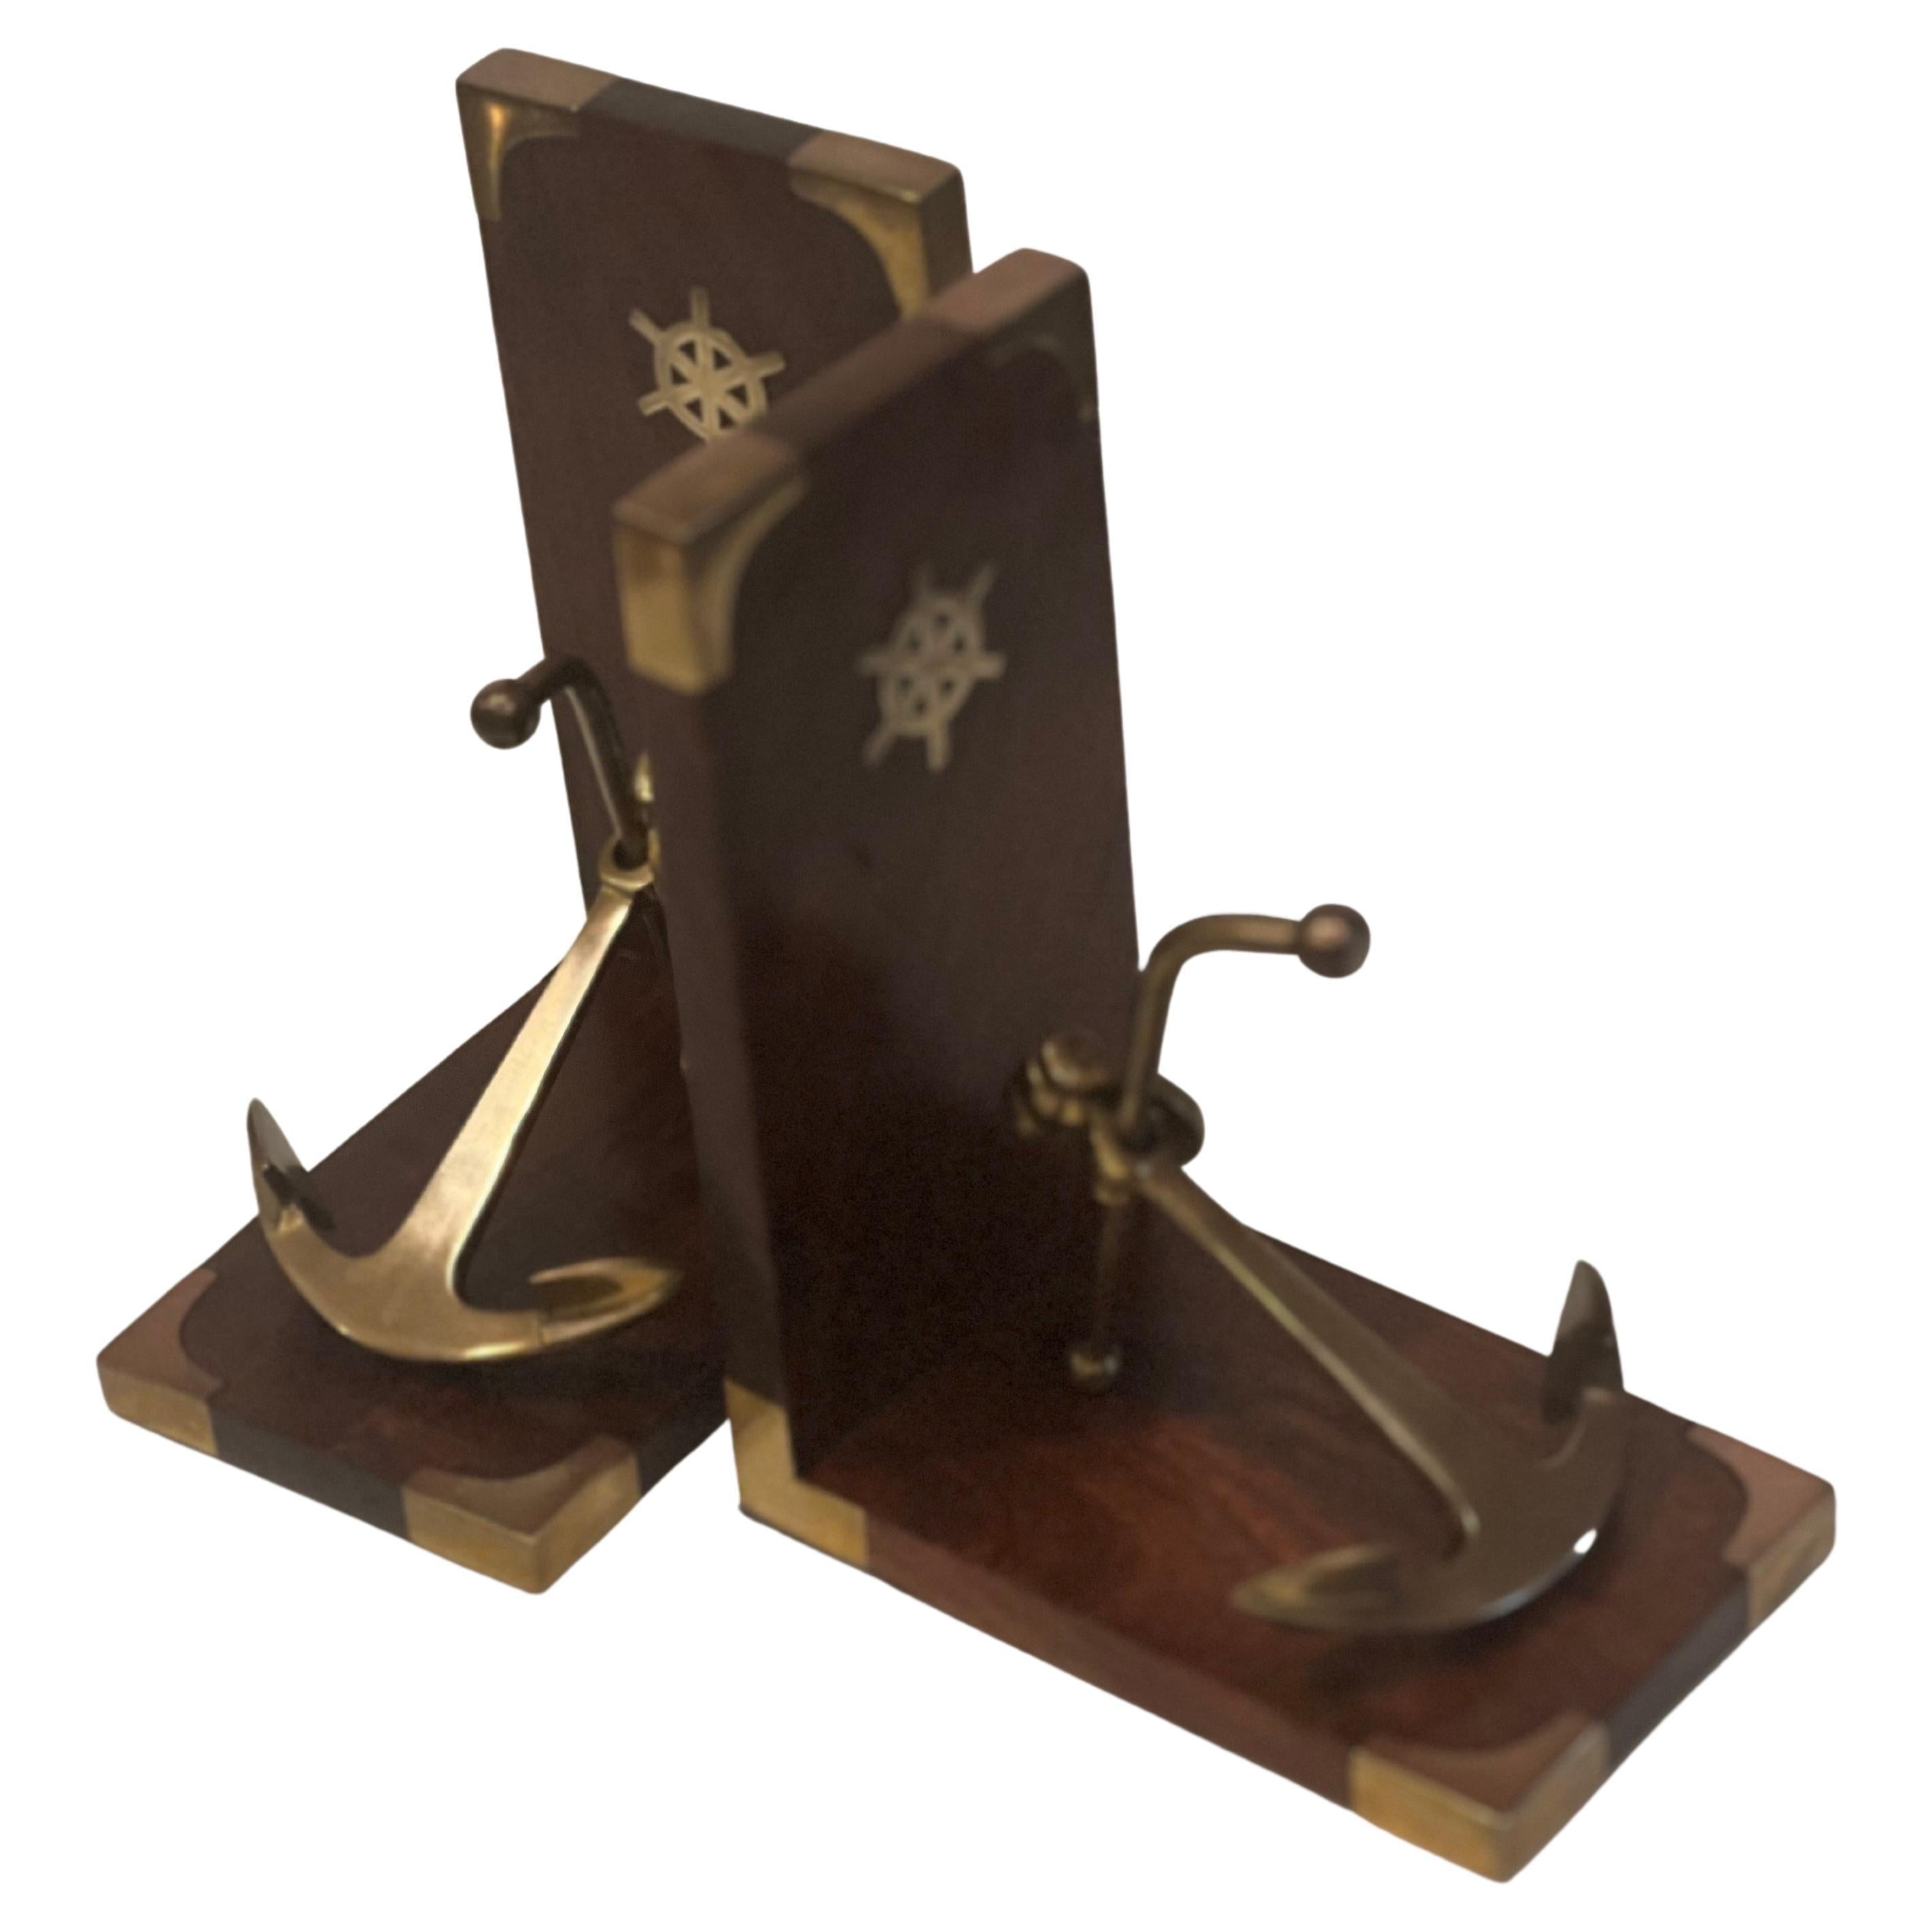 A pair of solid rosewood and patinated solid brass bookends circa 1970's beautiful and elegant in the style of Ralph Lauren, made in Italy in nice condition.